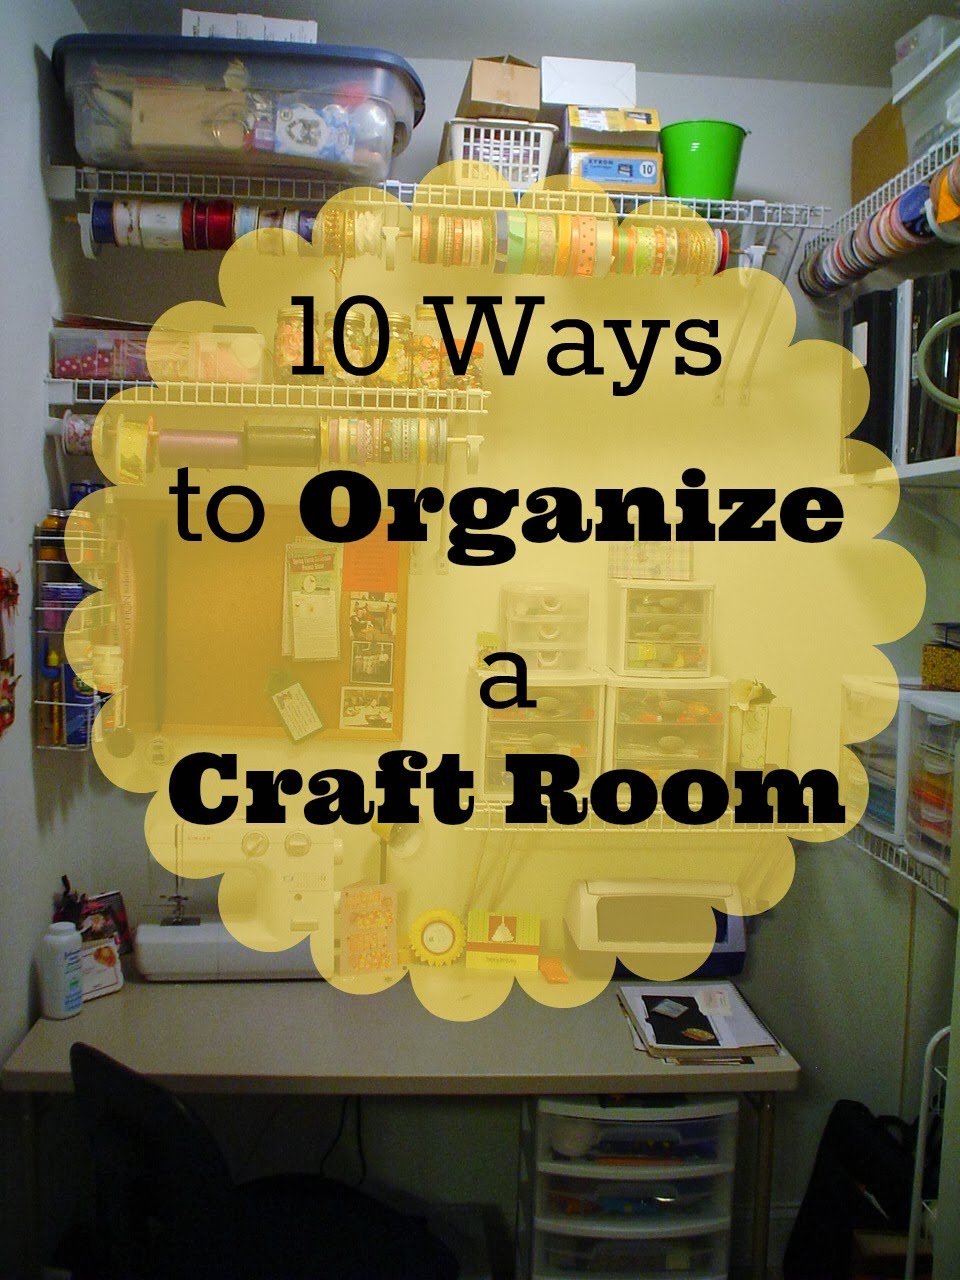 Southern Scraps : Organize it: The craft room- 10 ways